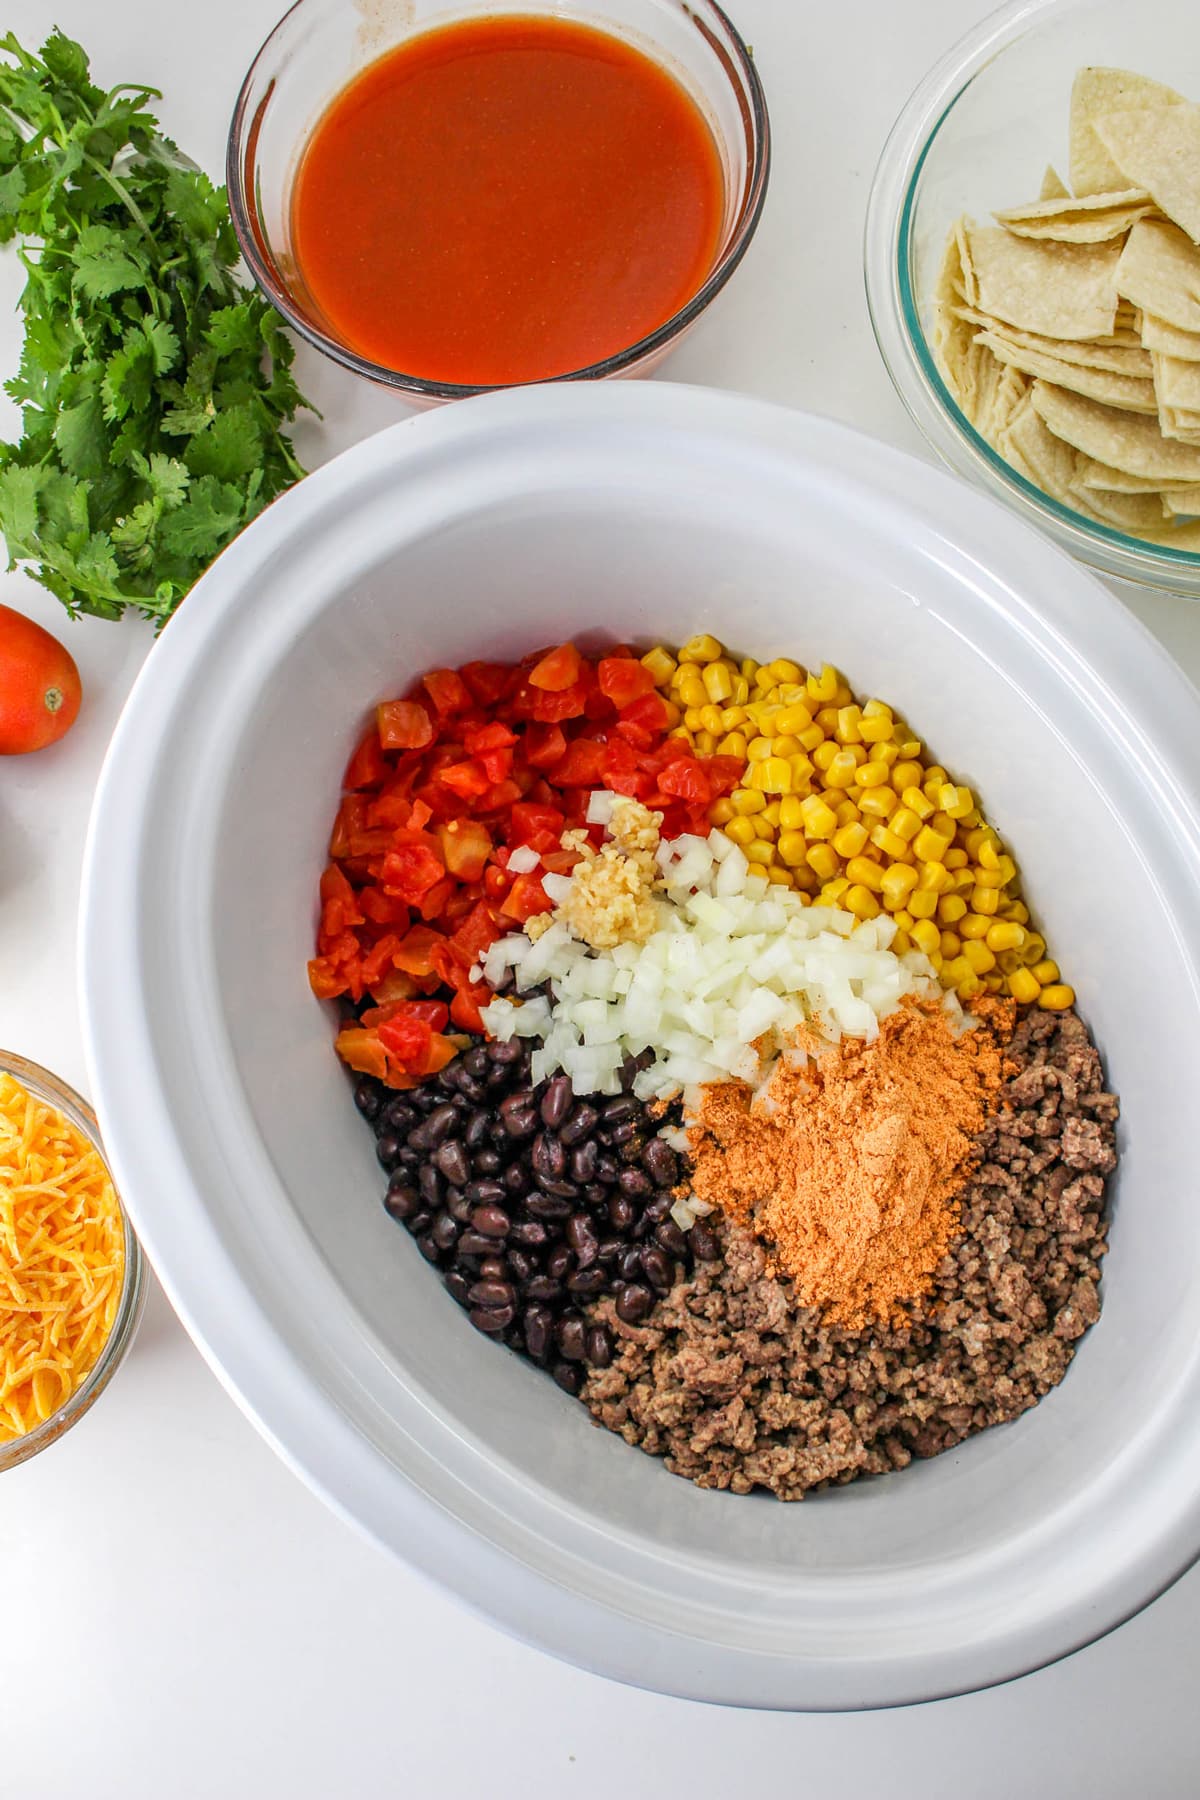 First process in preparing Crockpot Mexican Casserole is to add the ground beef, enchilada sauce, garlic, tomatoes with green chiles, onions, black beans, corn, and taco seasoning to the slow cooker.